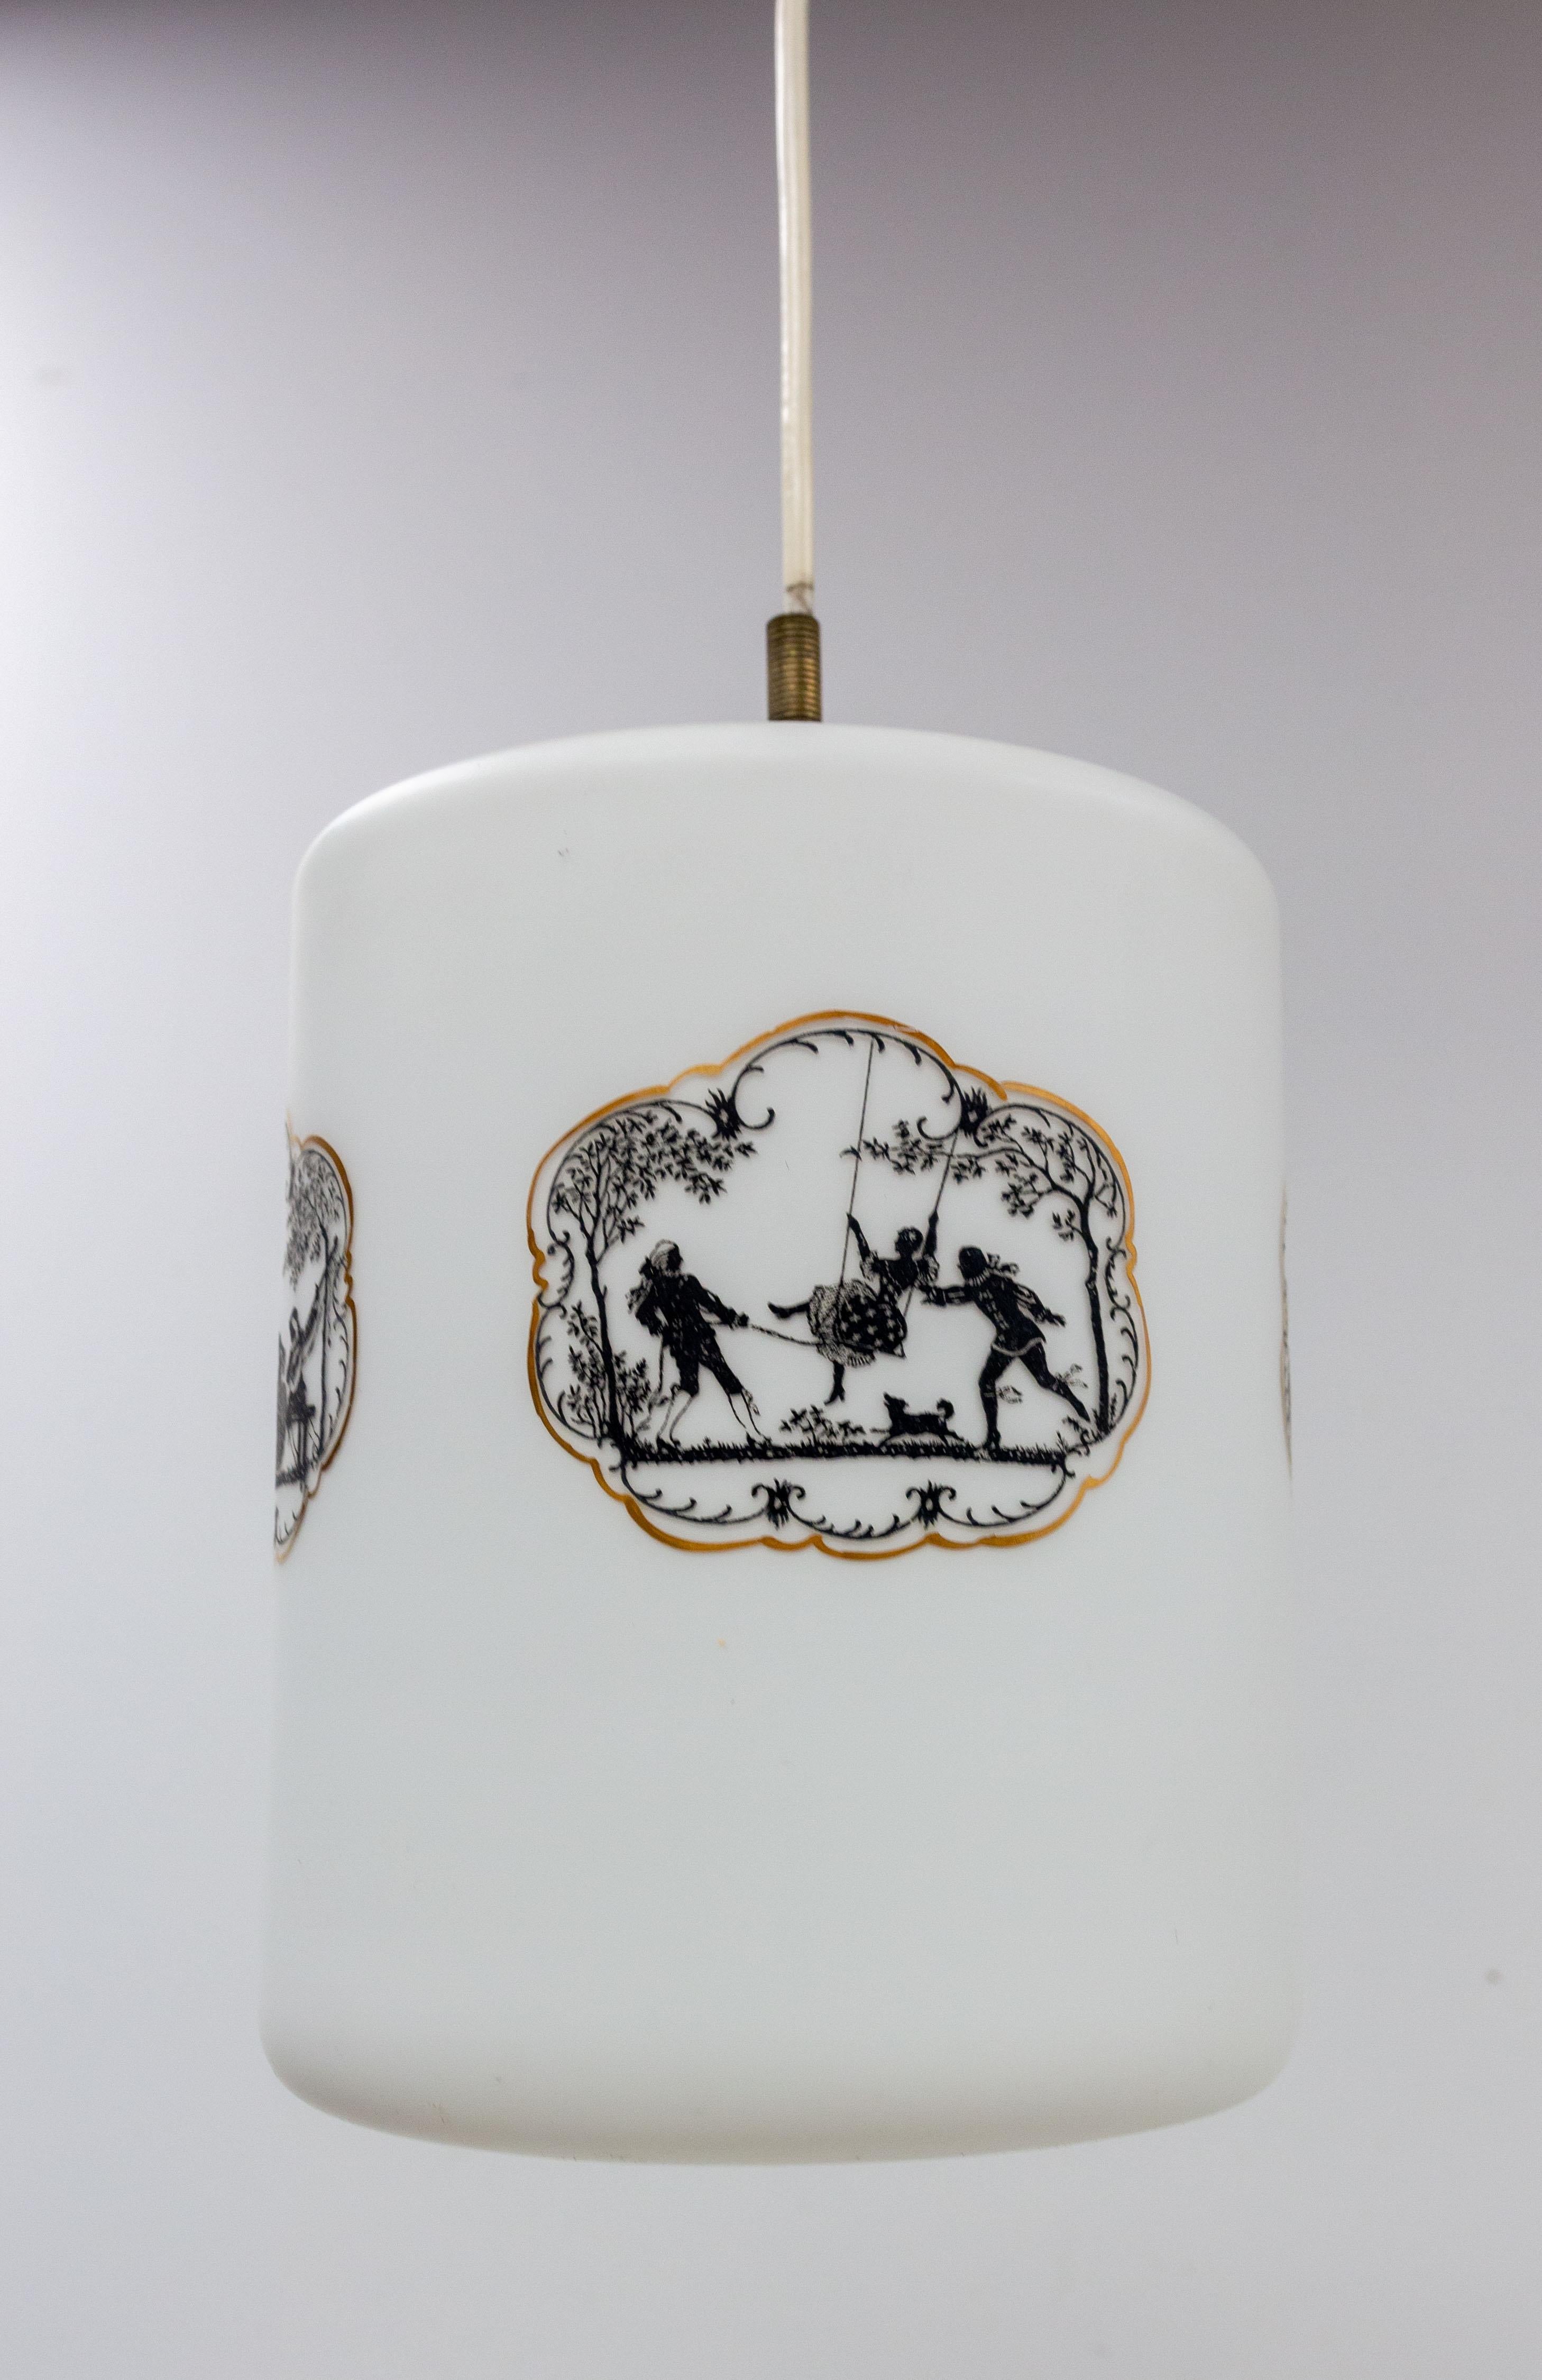 Ceiling pendant lamp in glass mid-century
The illustrations represent two romantic scenes. One scene represents two men with a woman on a swing and a dog. The second picture represents a a dance scene with two musicians and two women.
Good vintage